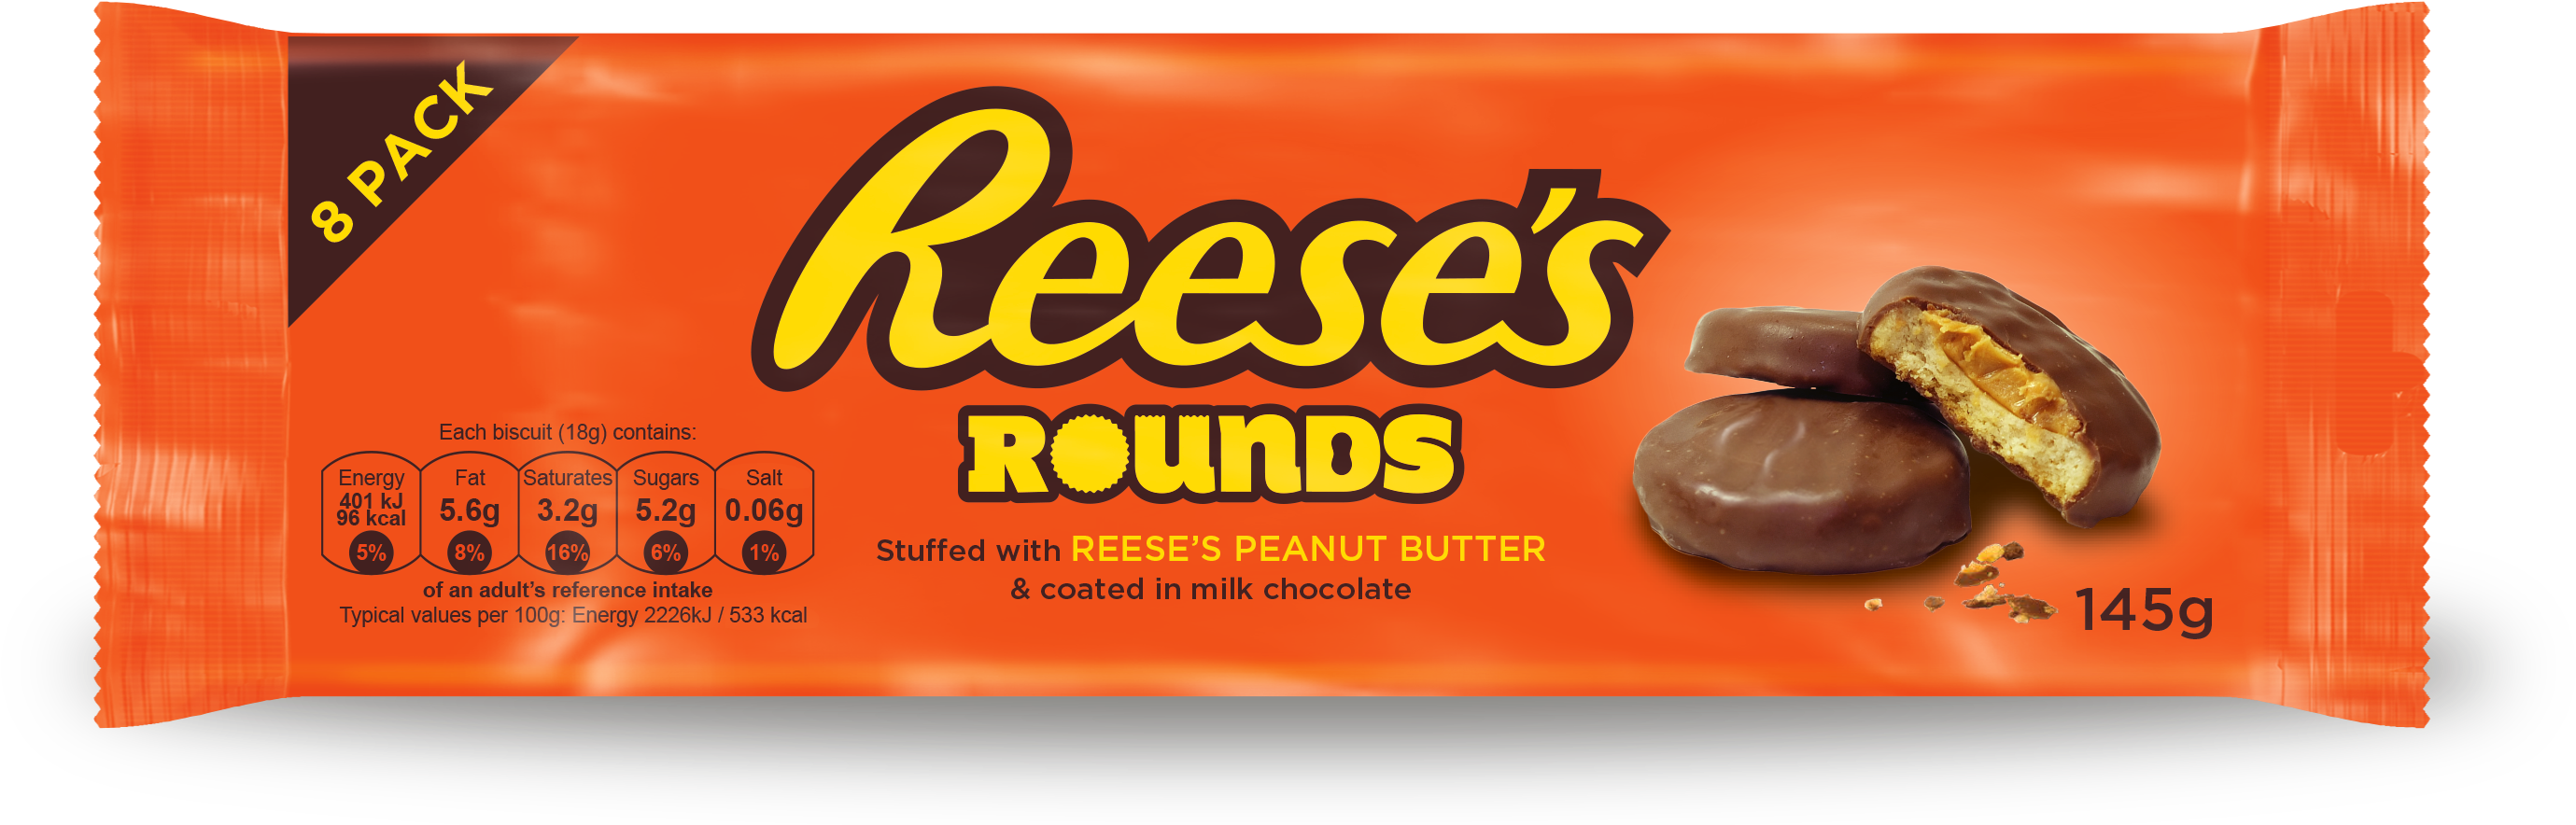 Reese%27s Rounds 8 Pack Visual 15 - Reese's Peanut Butter Cups (3066x1018), Png Download